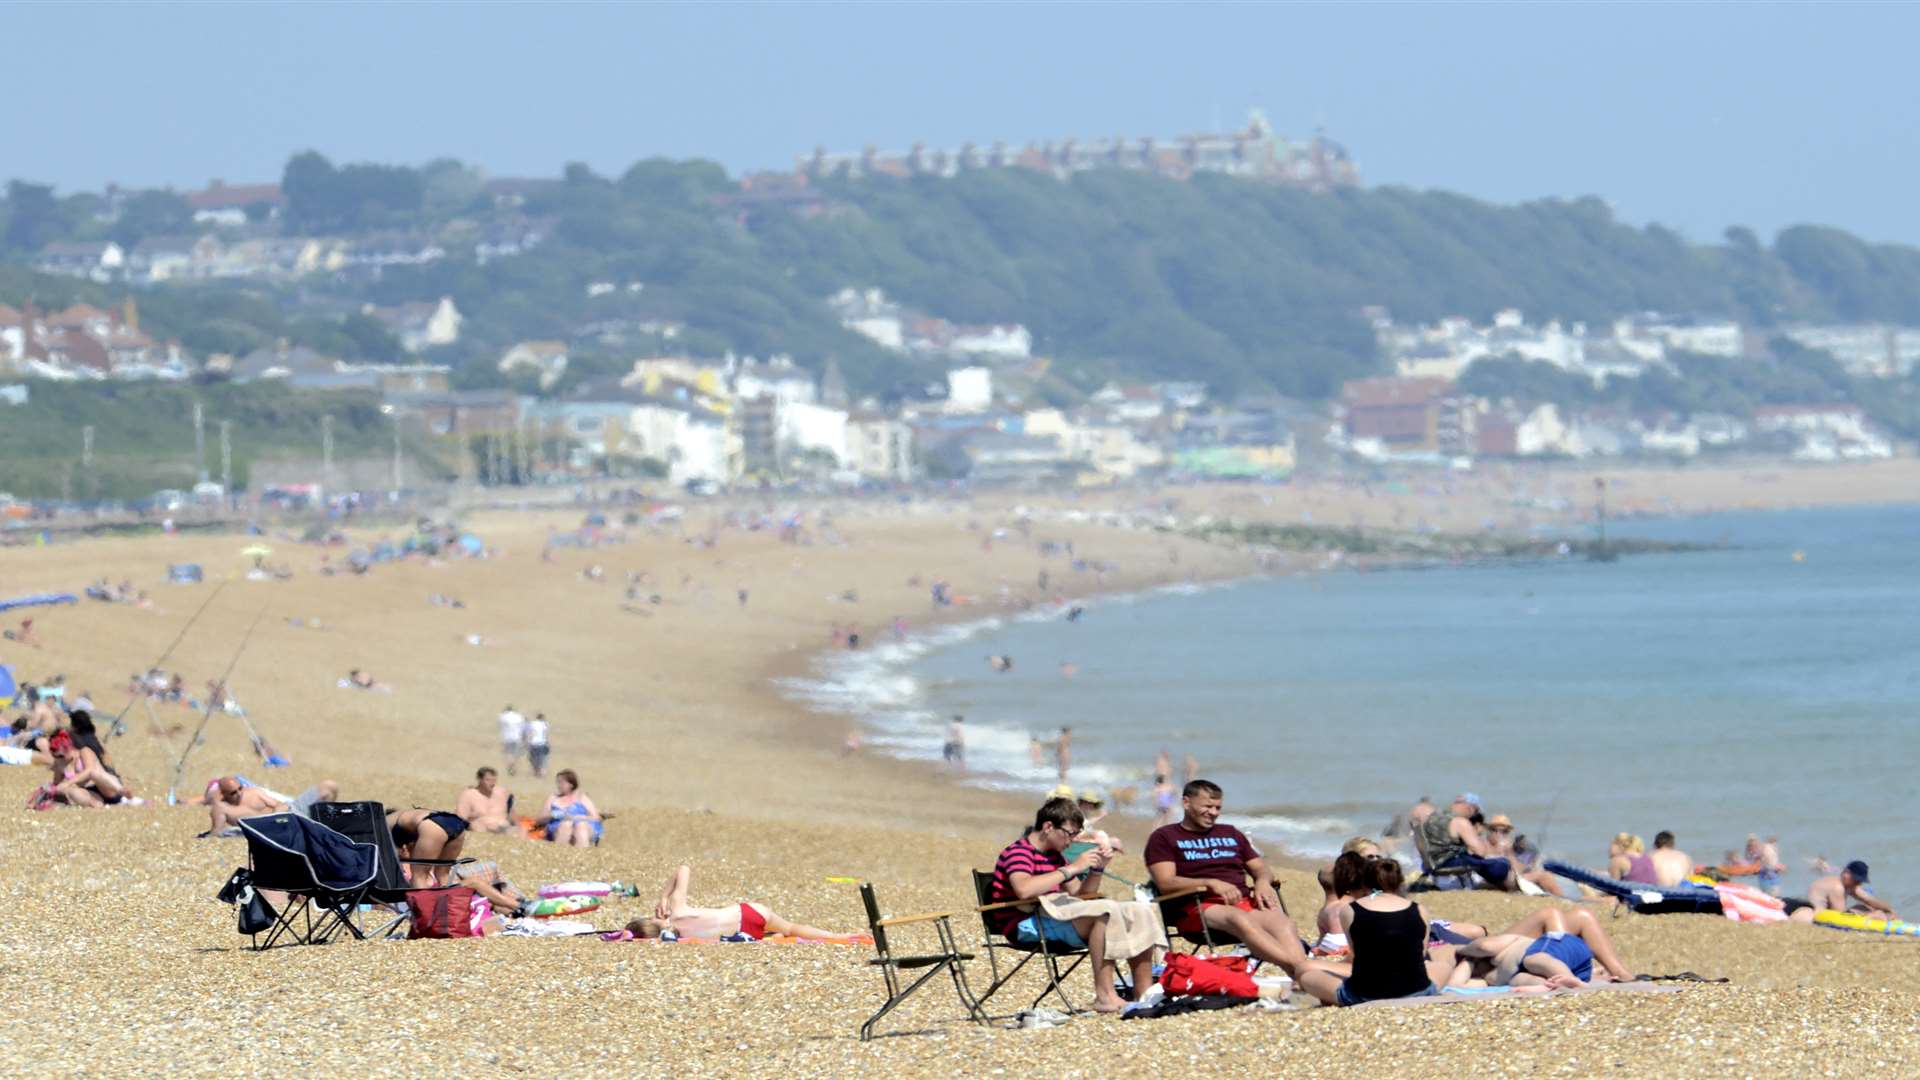 Hot and hazy days in Hythe. File picture